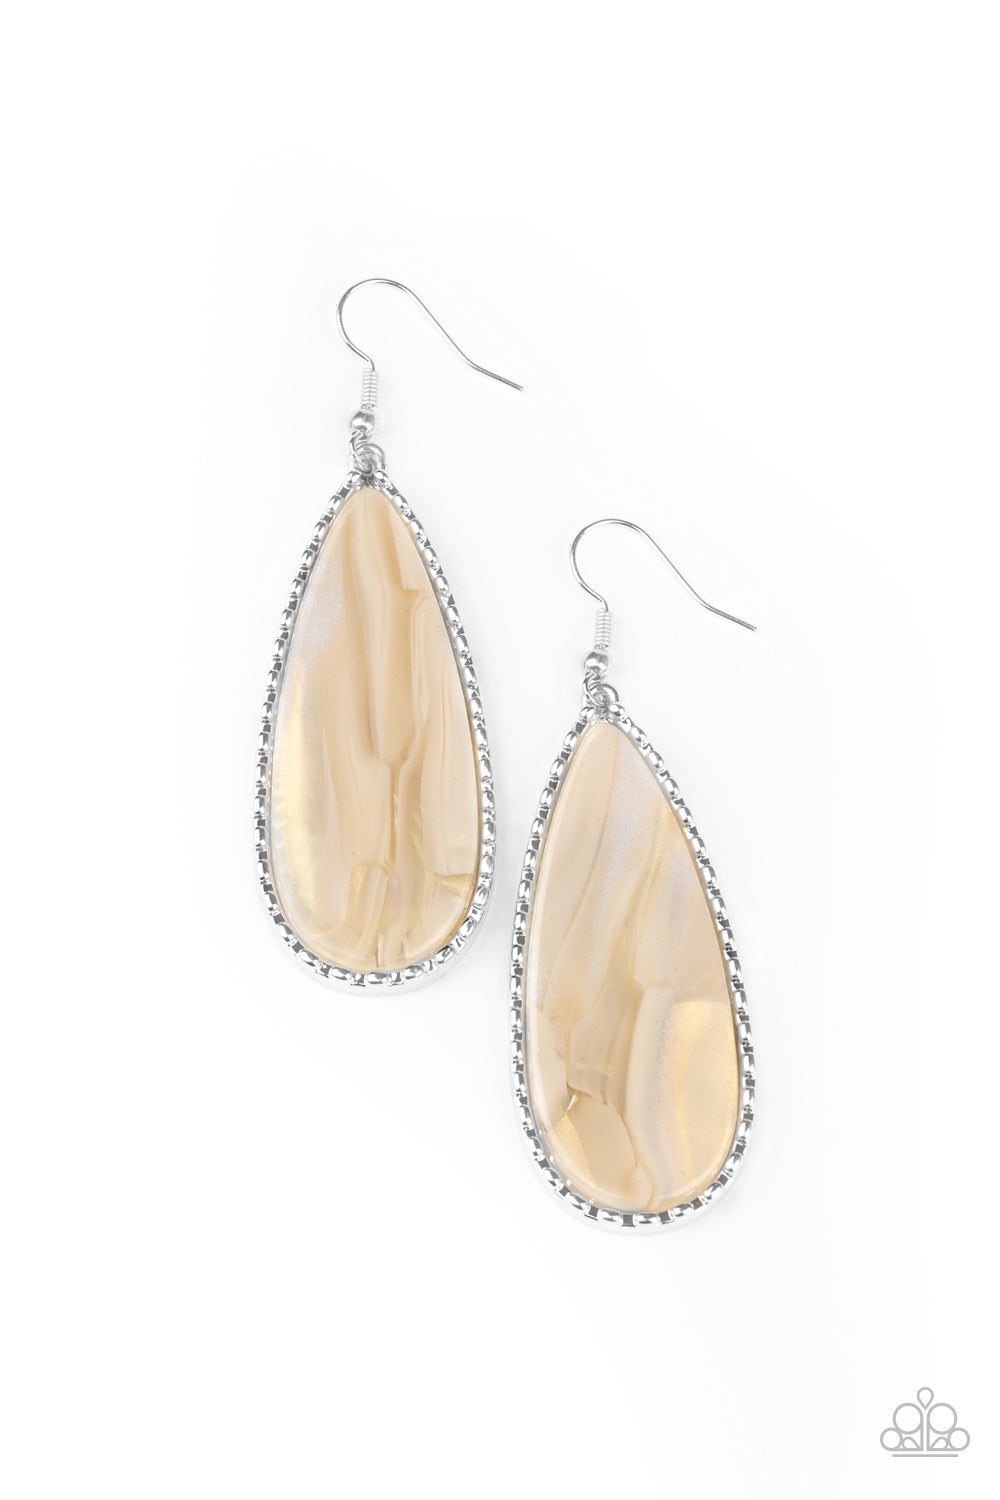 Ethereal Eloquence - white - Paparazzi earrings